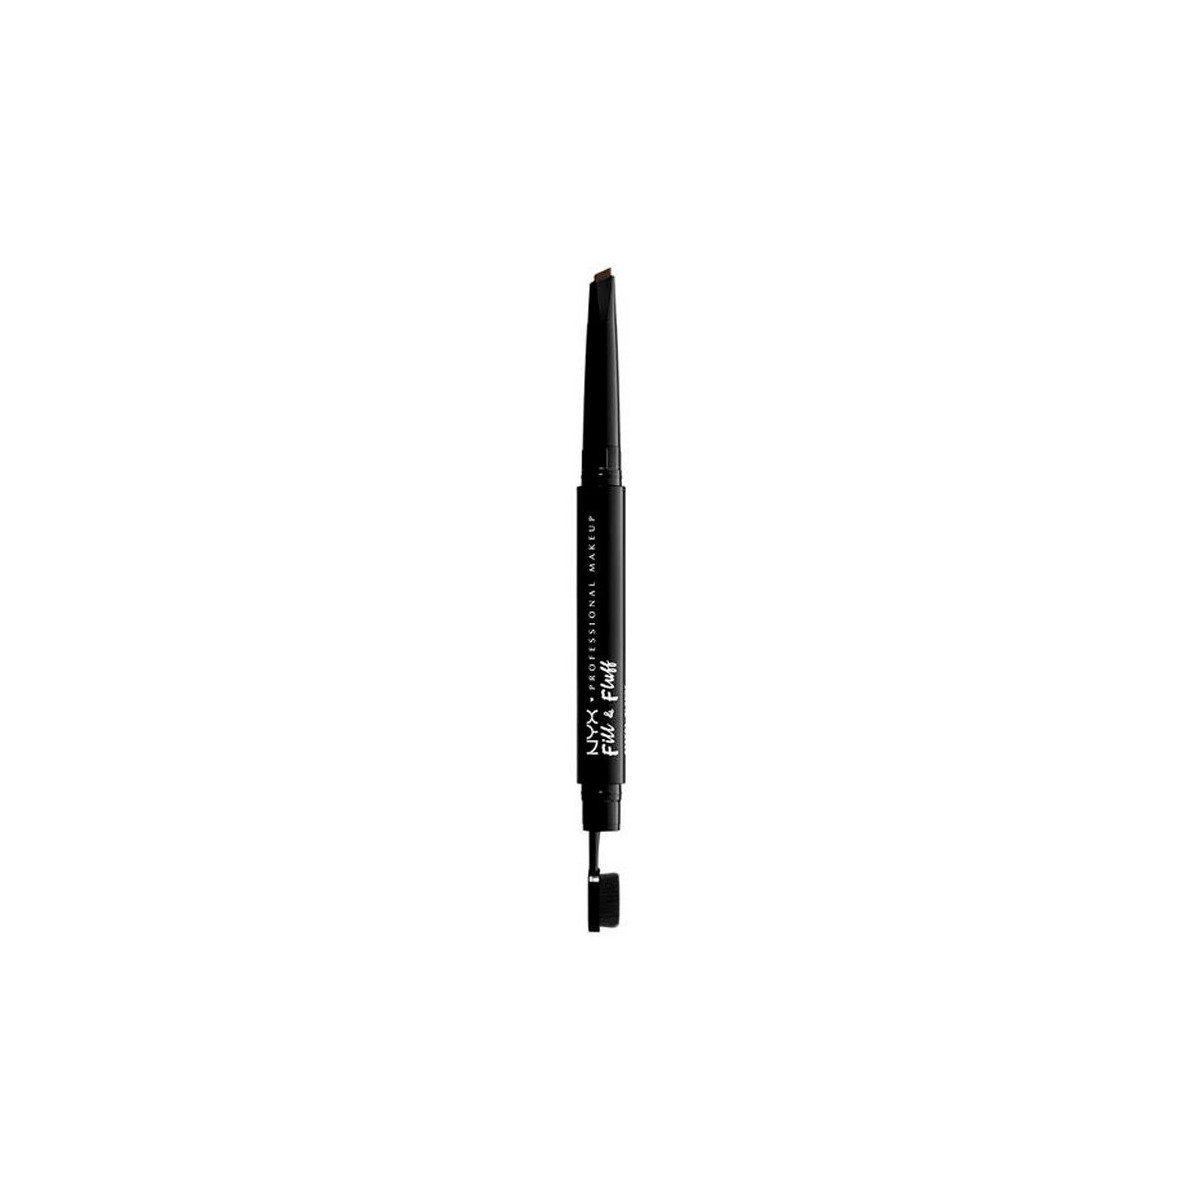 Beauté Femme Maquillage Sourcils Nyx Professional Make Up Fill & Fluff Eyebrow Pomade Pencil espreso 